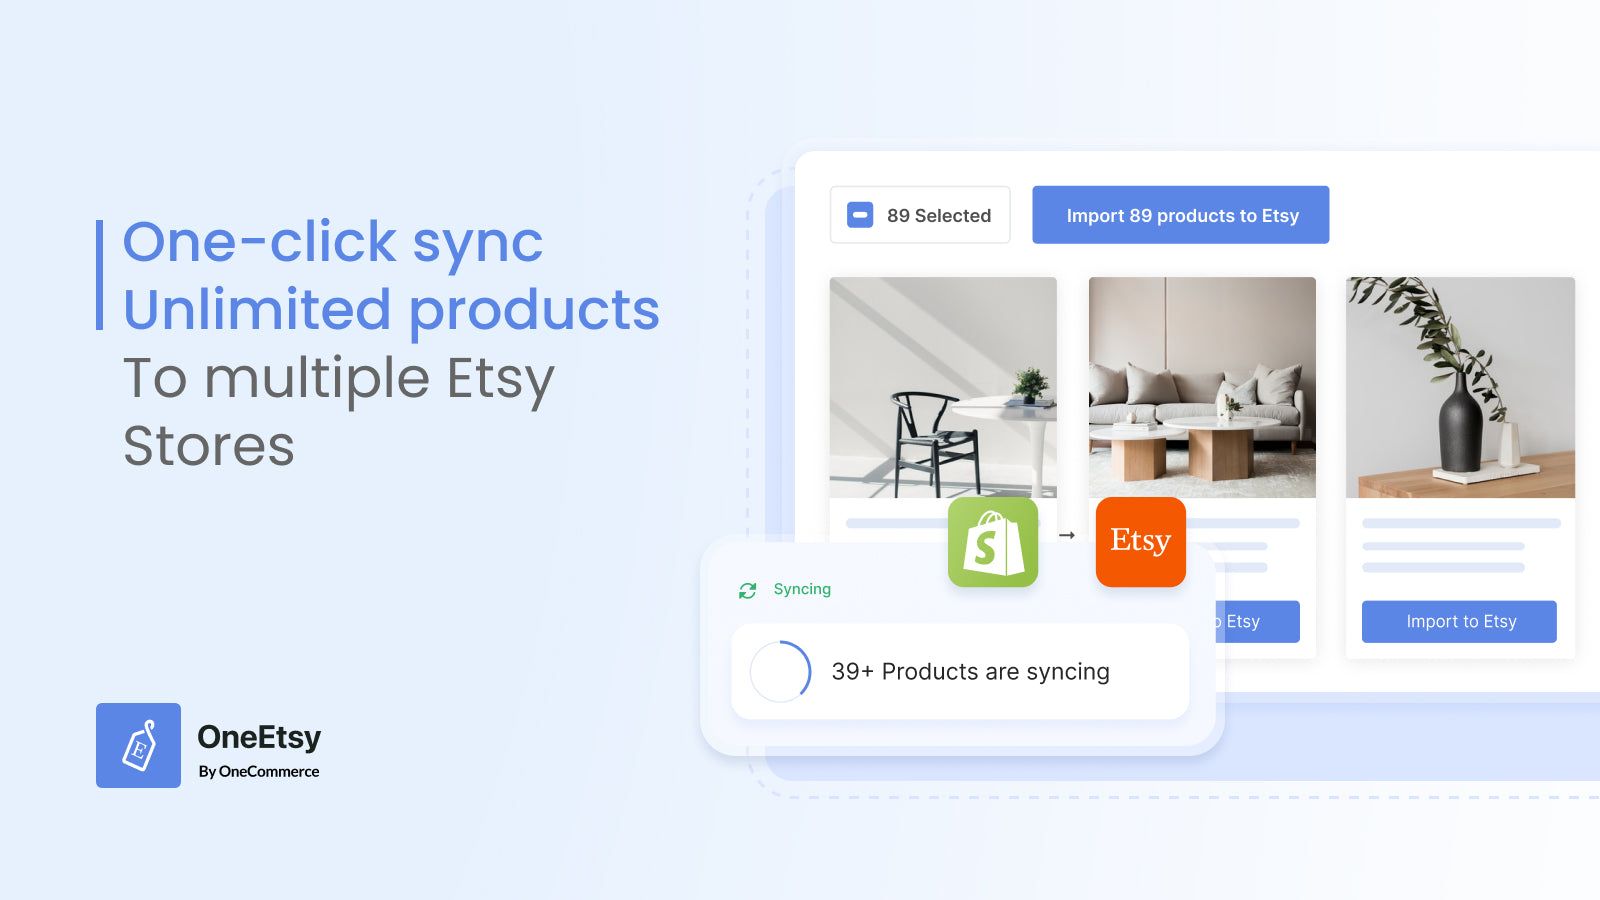 One-click sync unlimited products to multiple Etsy stores